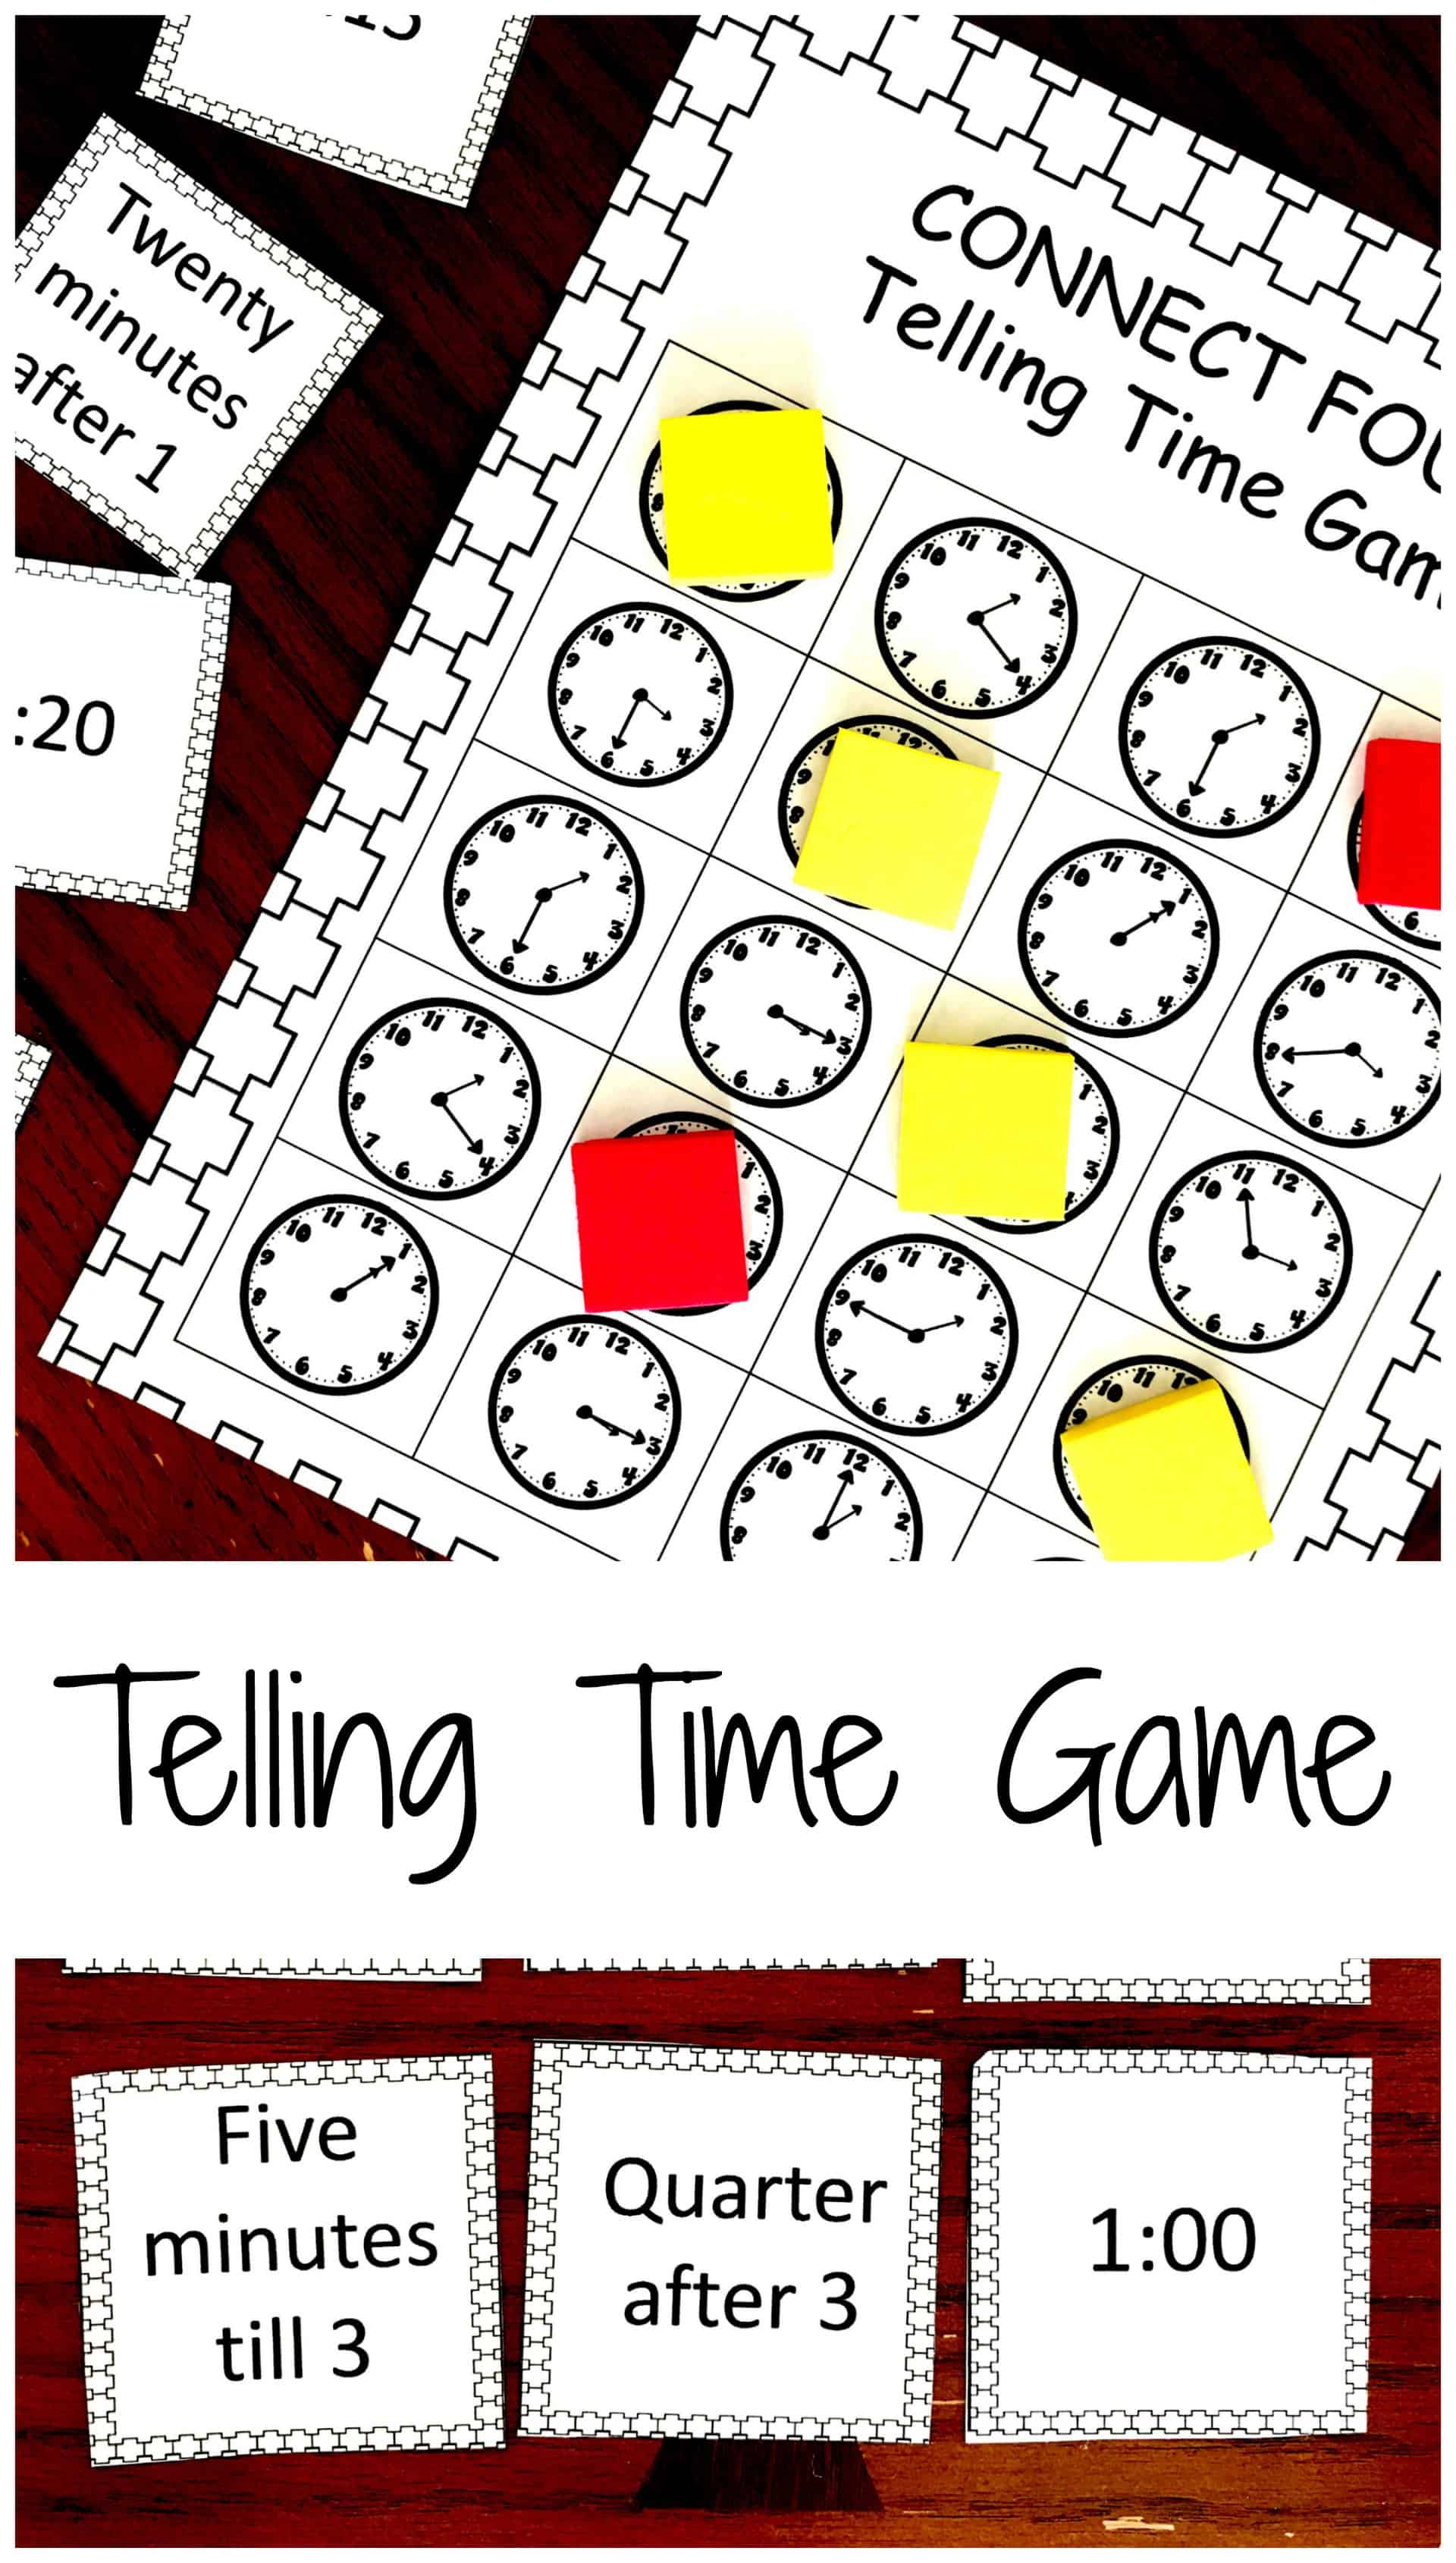 Time games using a bingo card with clocks showing various times with pieces of yellow and red paper covering them up. 